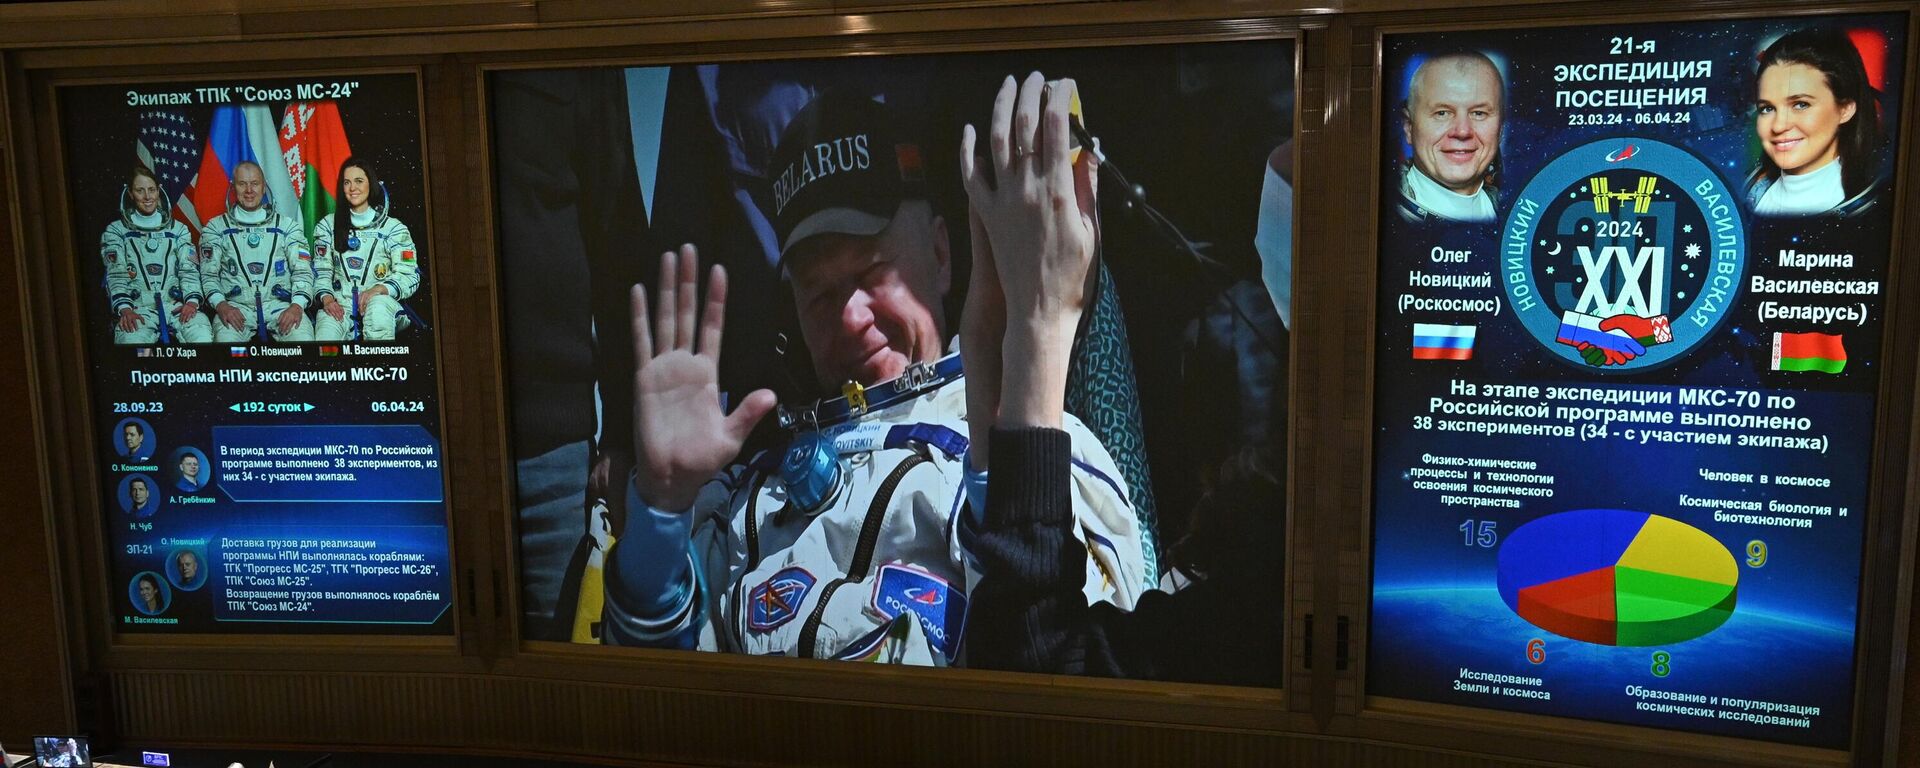 Russian cosmonaut Oleg Novitsky appears on a screen during a live broadcast of the landing of the Soyuz MS-24 spacecraft with the crew returned to Earth from the International Space Station (ISS), at the Mission Control Centre of Roscosmos in Korolyov, Moscow region, Russia - Sputnik International, 1920, 12.04.2024